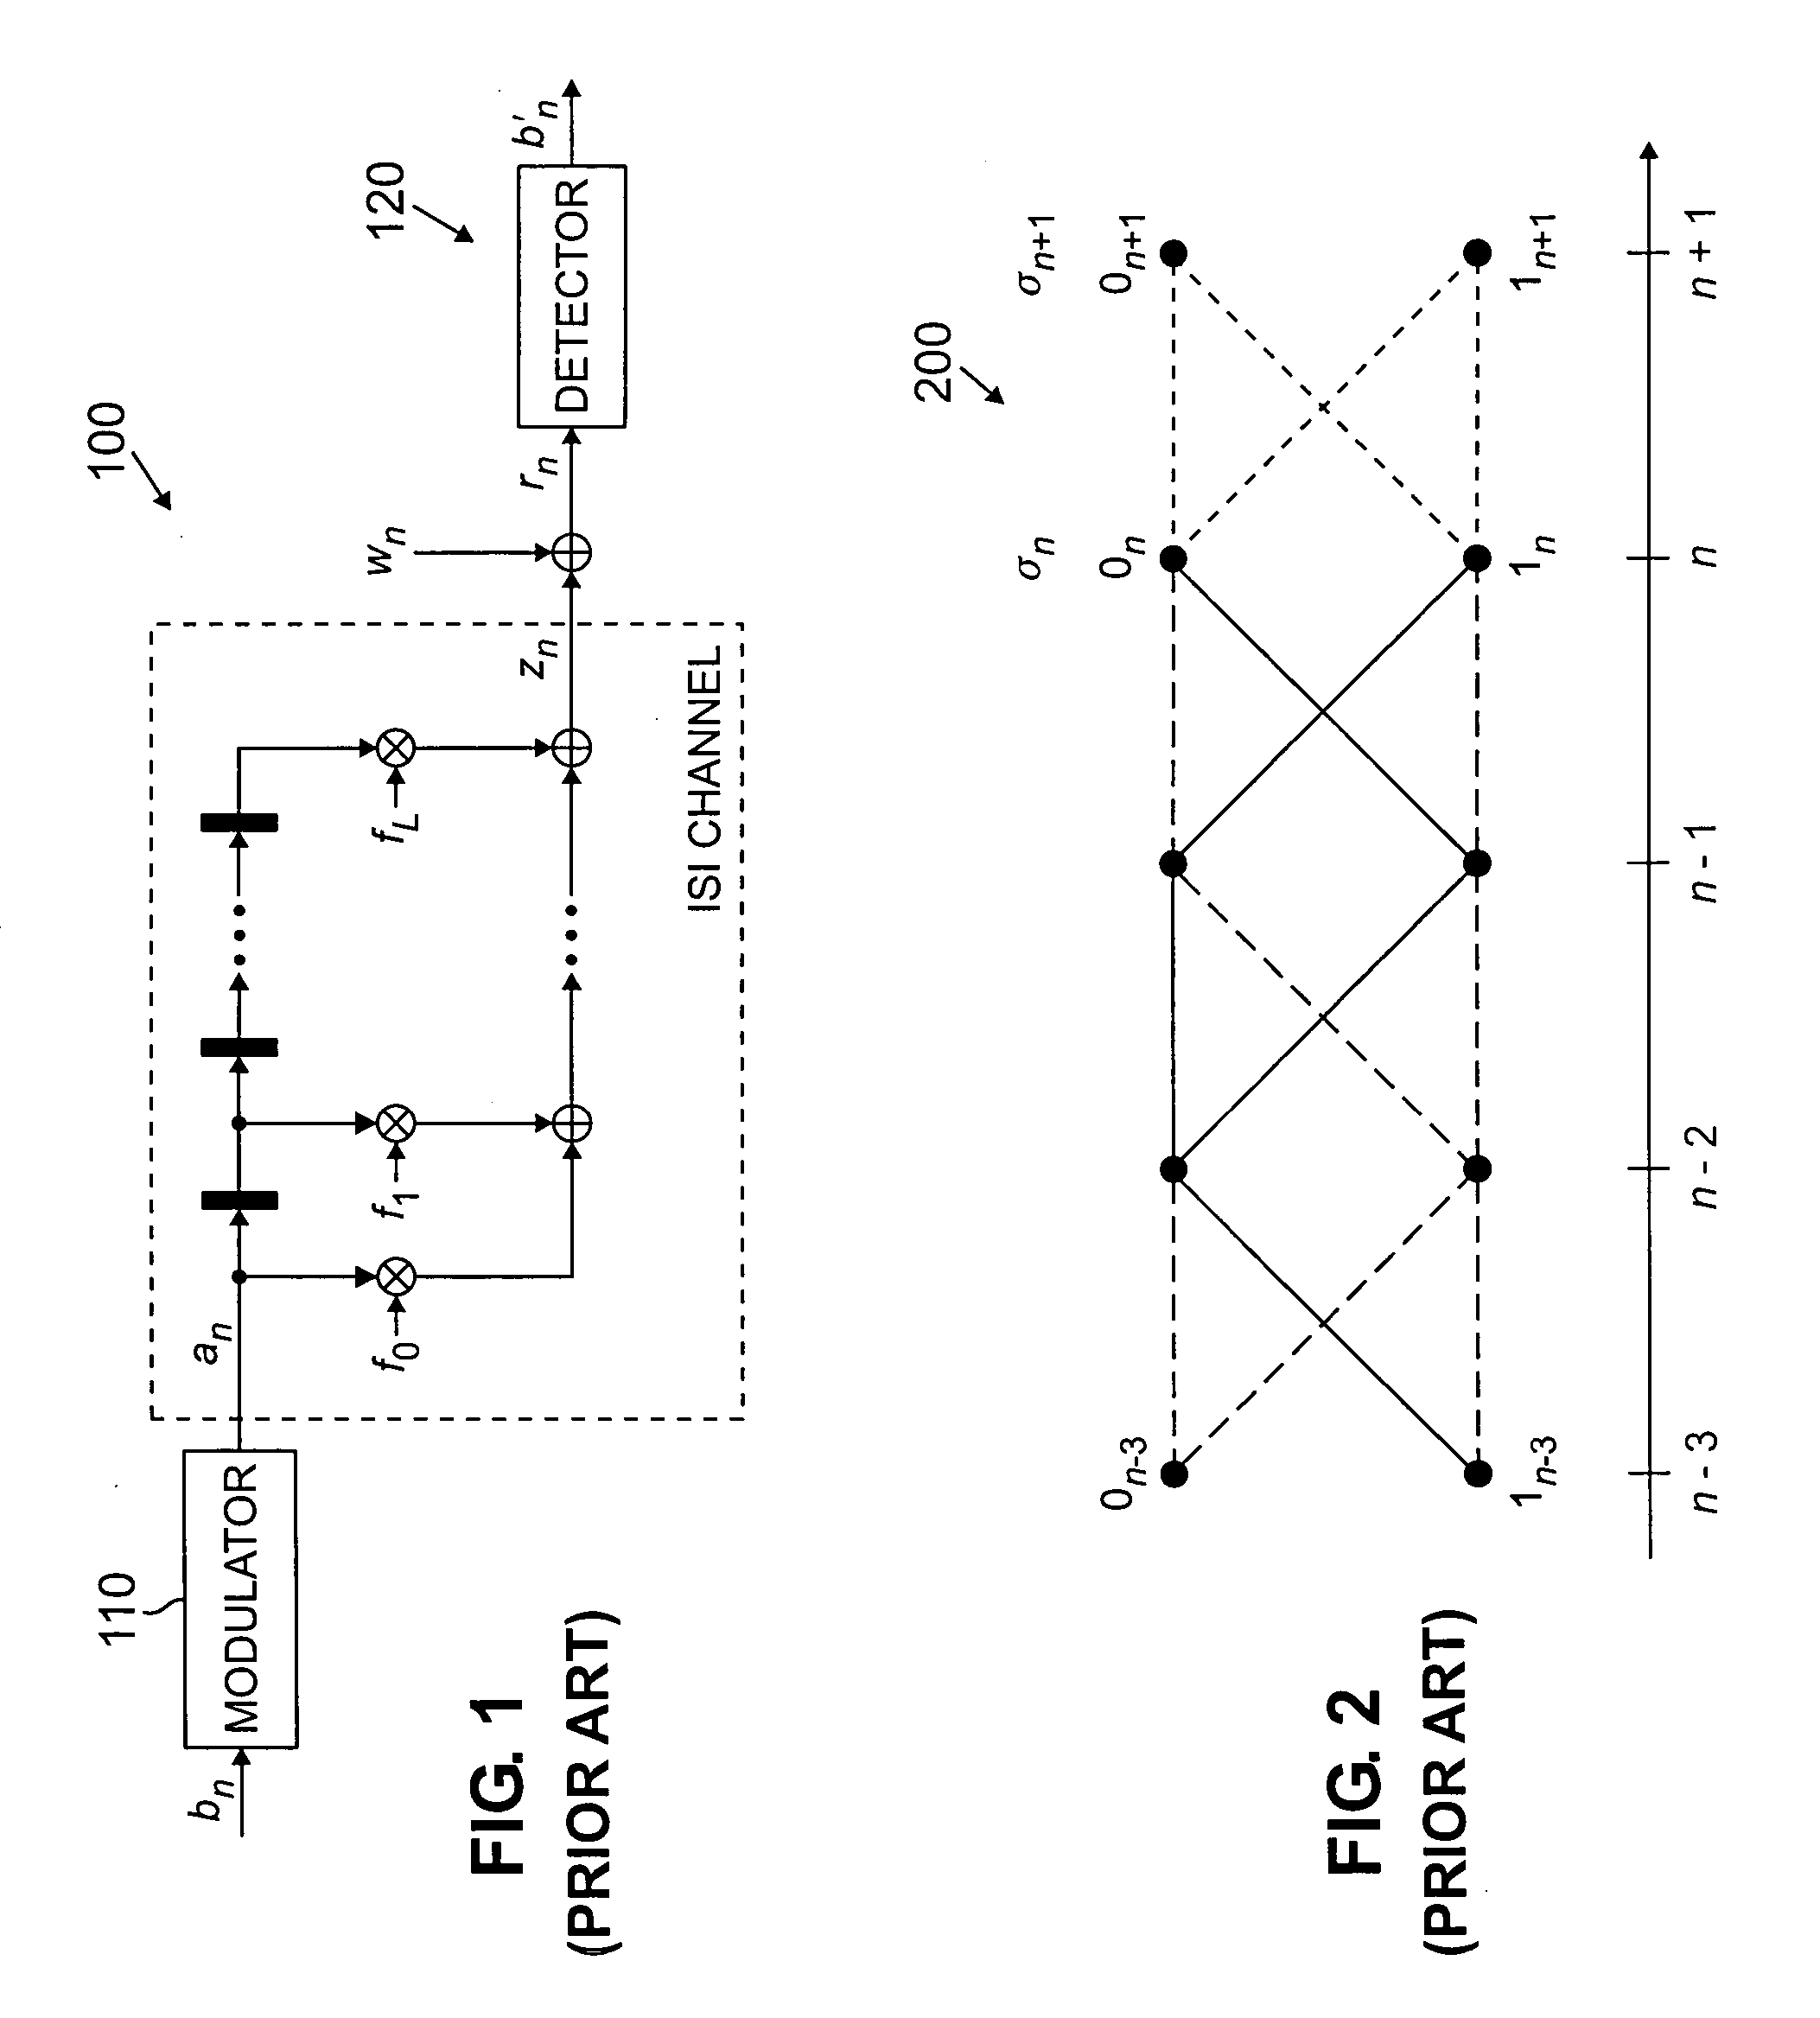 Method and apparatus for precomputation and pipelined selection of intersymbol interference estimates in a reduced-state Viterbi detector